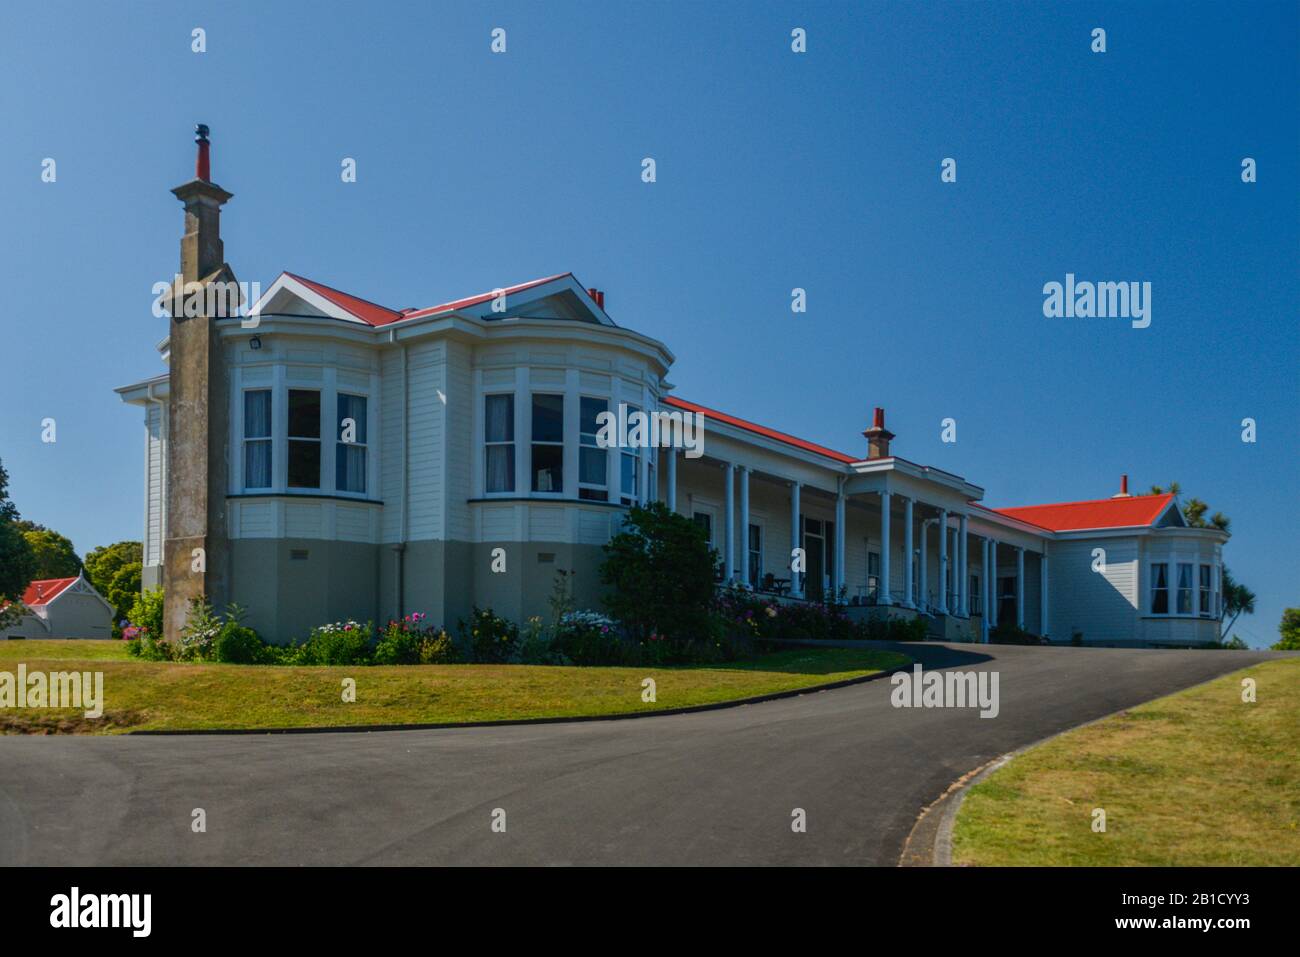 Mid 1900's architecture of Bushy Park, an estate in the North Island of New Zealand. An elaborate weatherboard structure with corrugated tin roofing. Stock Photo